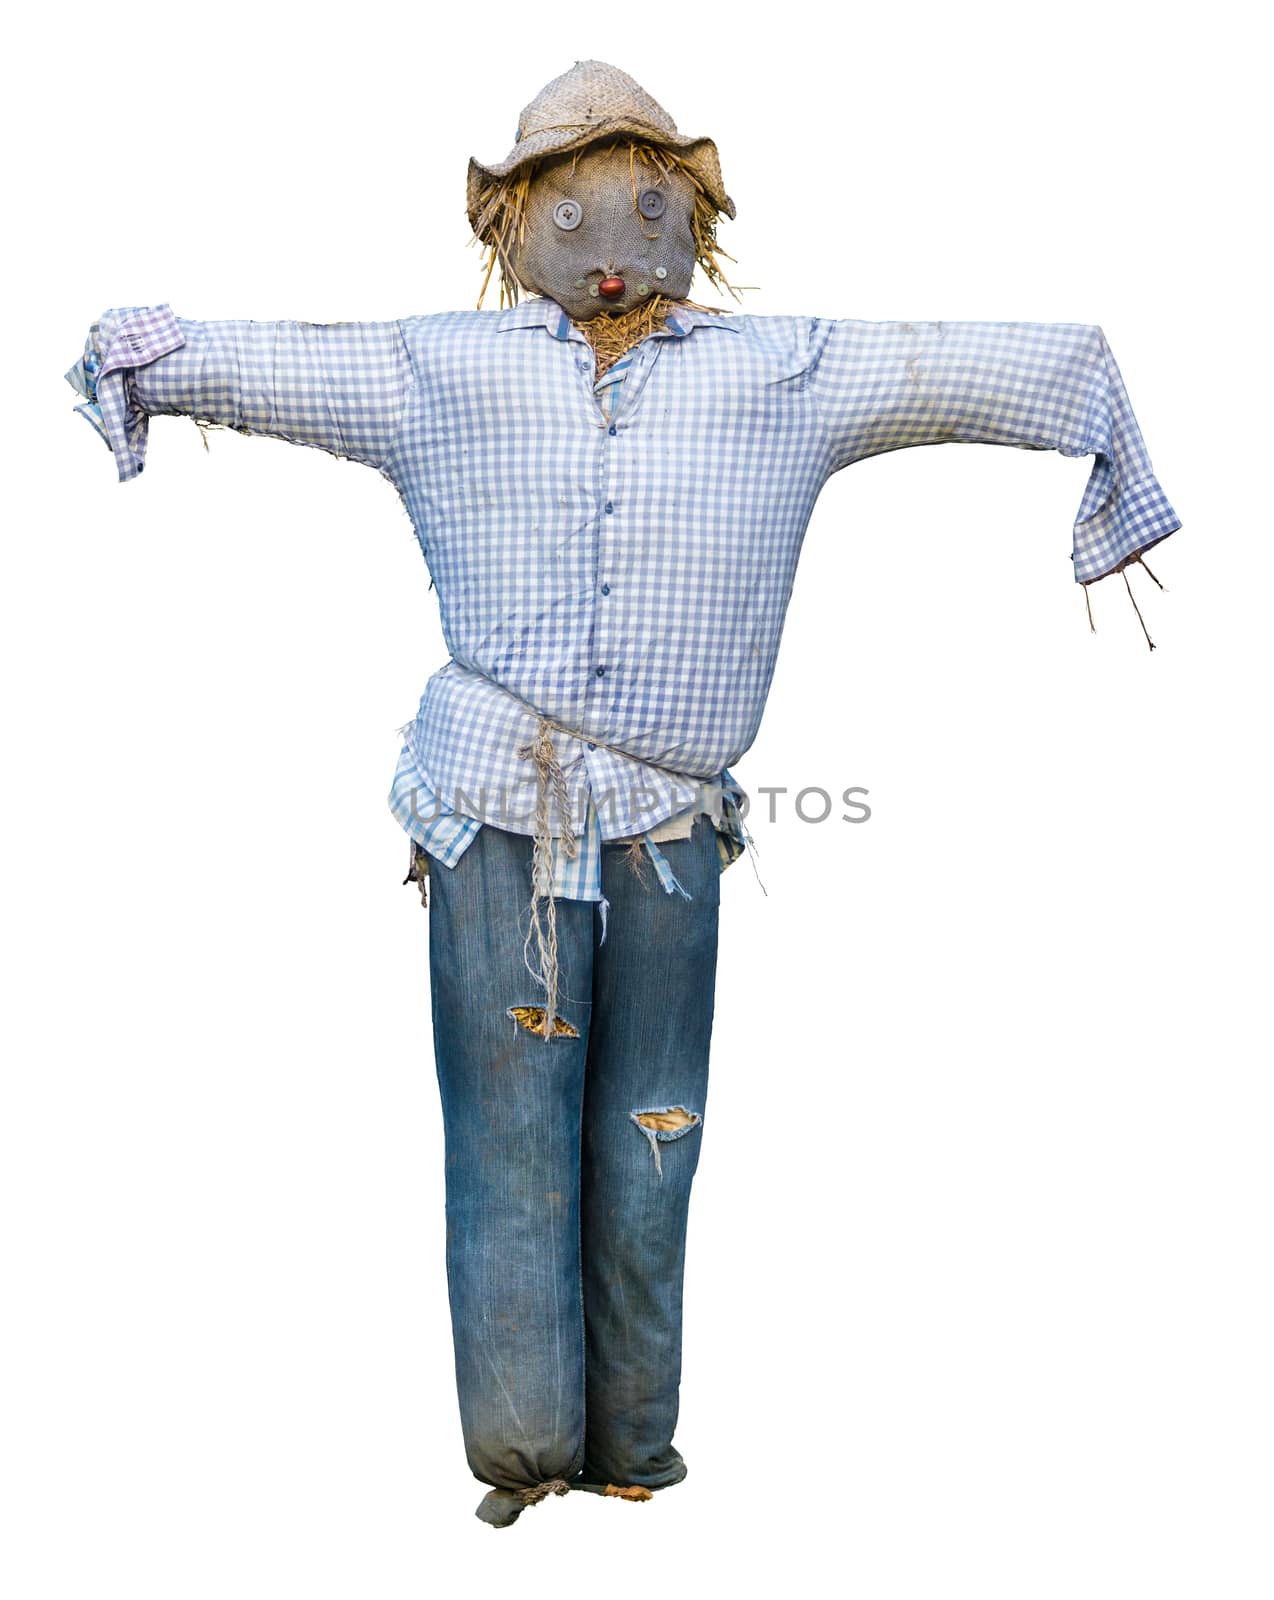 Spooky Isolated Scarecrow by mrdoomits